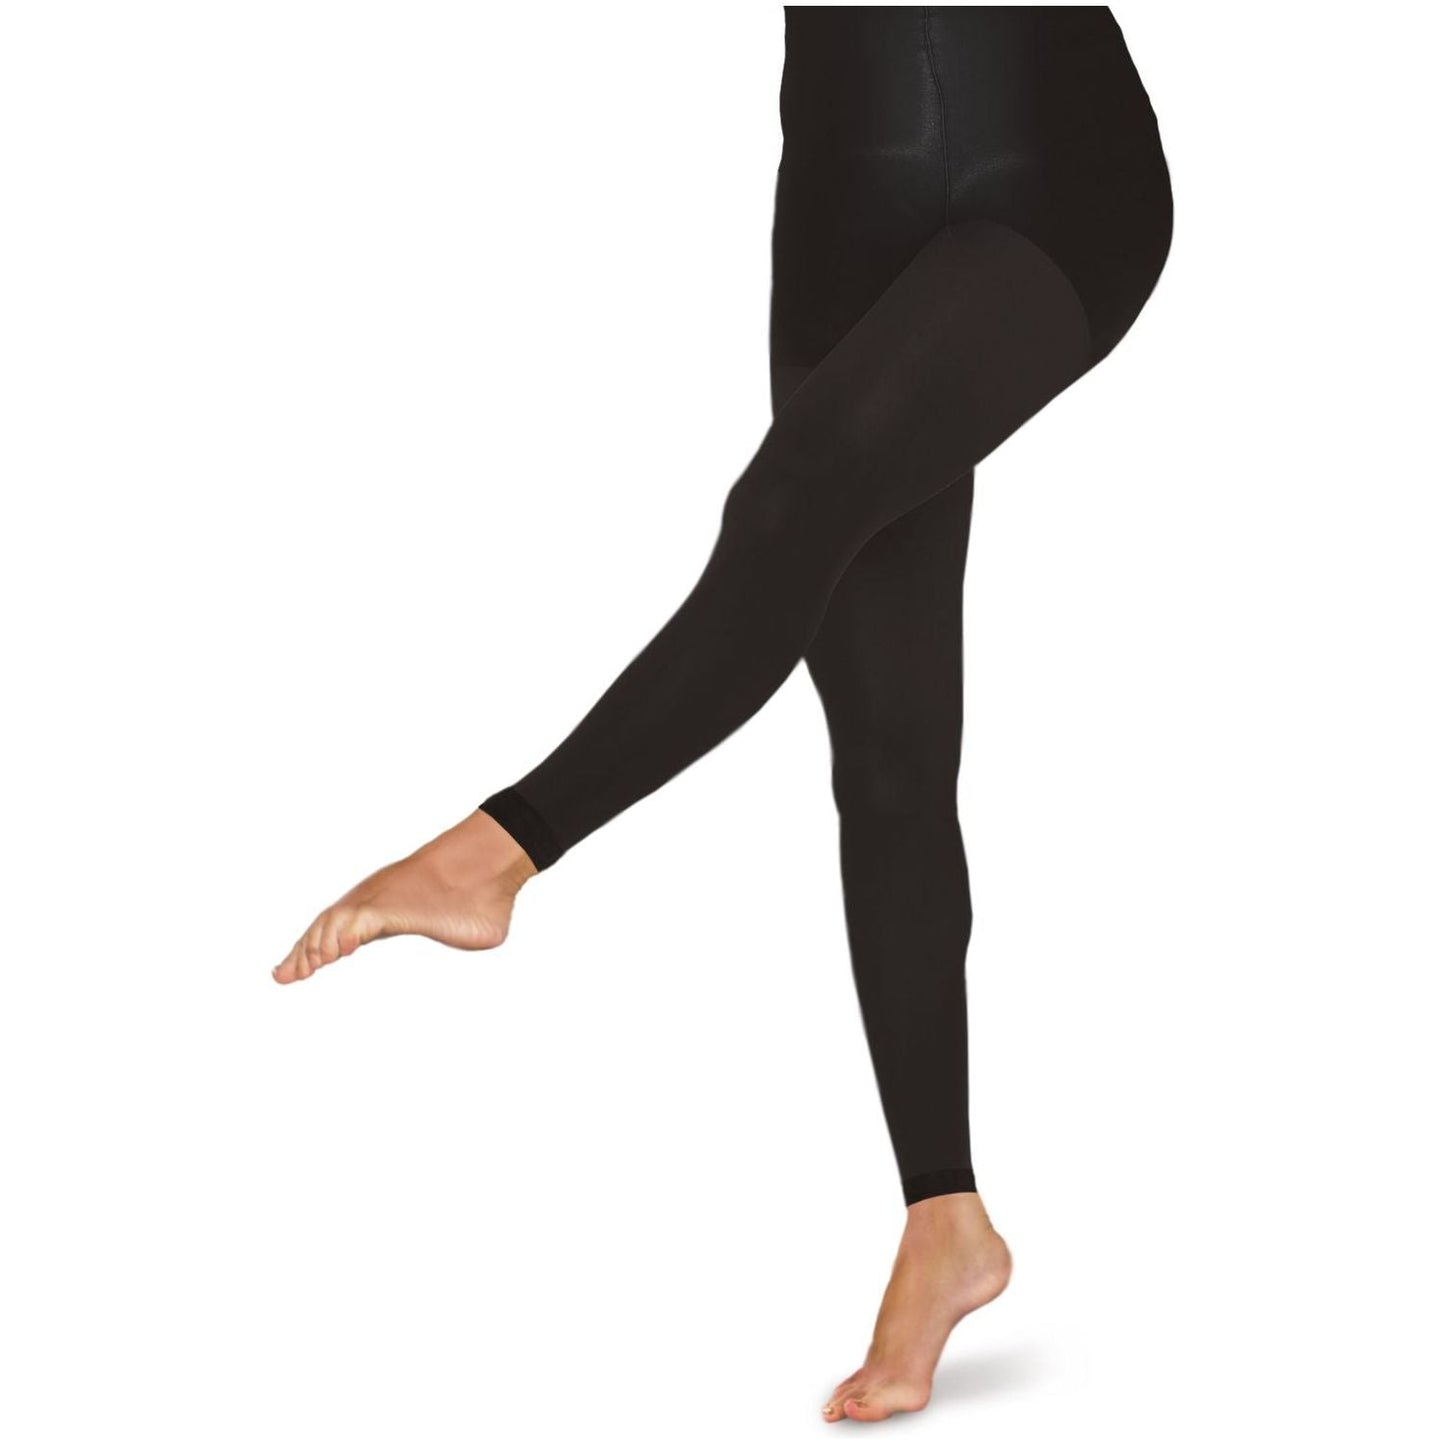 Womens Compression Footless Tights for Lymphedema 20-30mmHg - Black, Medium